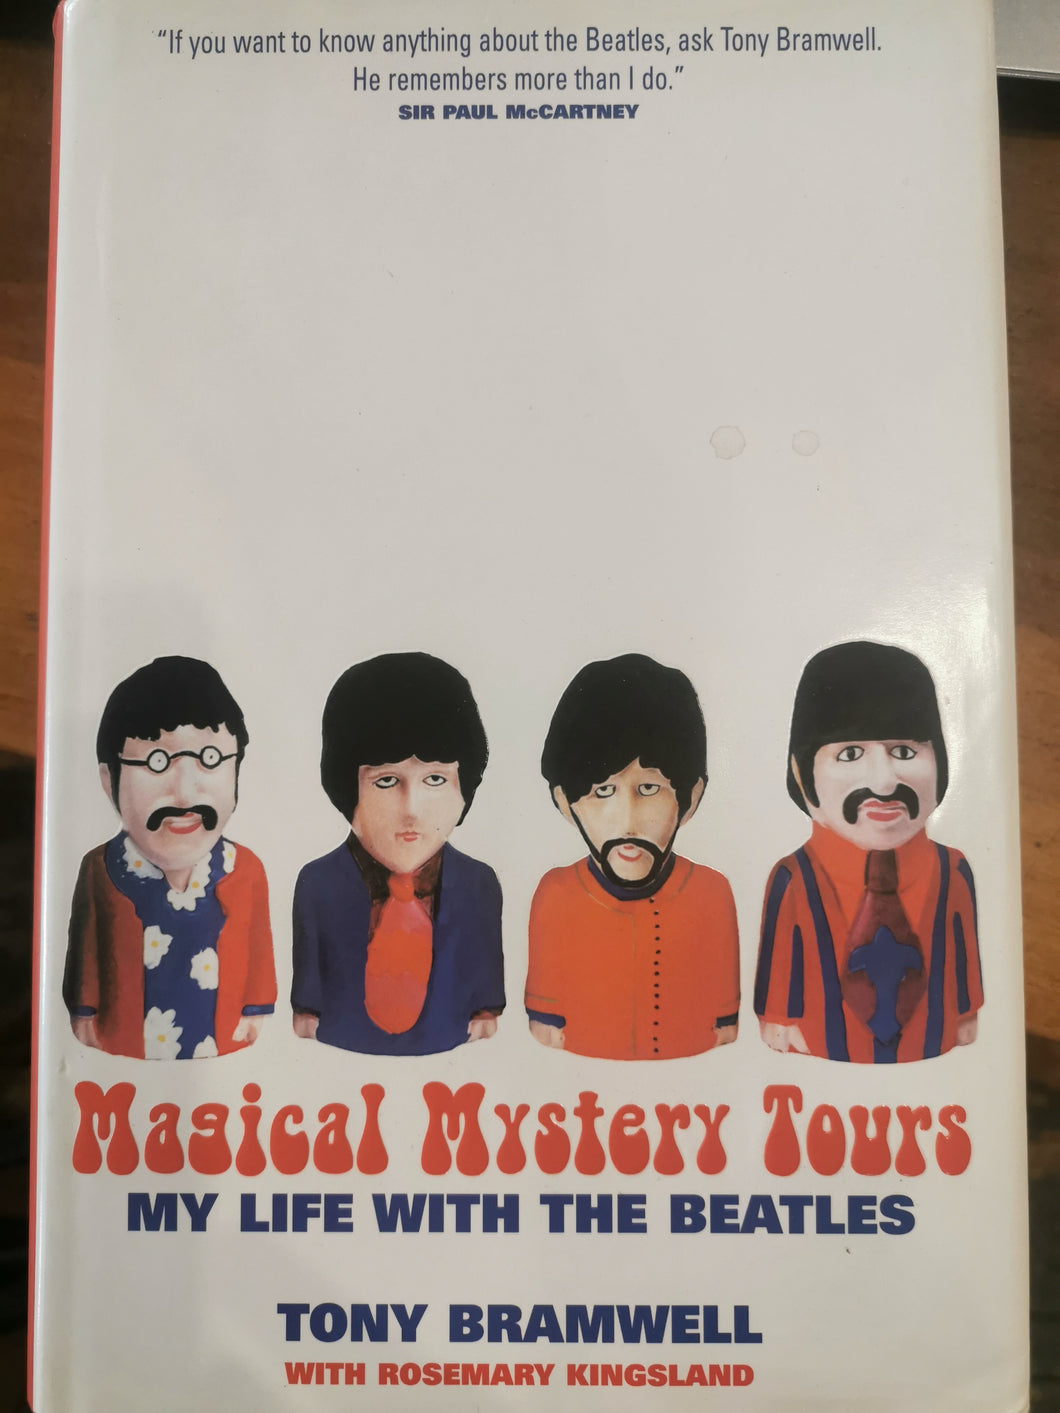 Magical Mystery Tours: My Life with the Beatles by Tony Bramwell